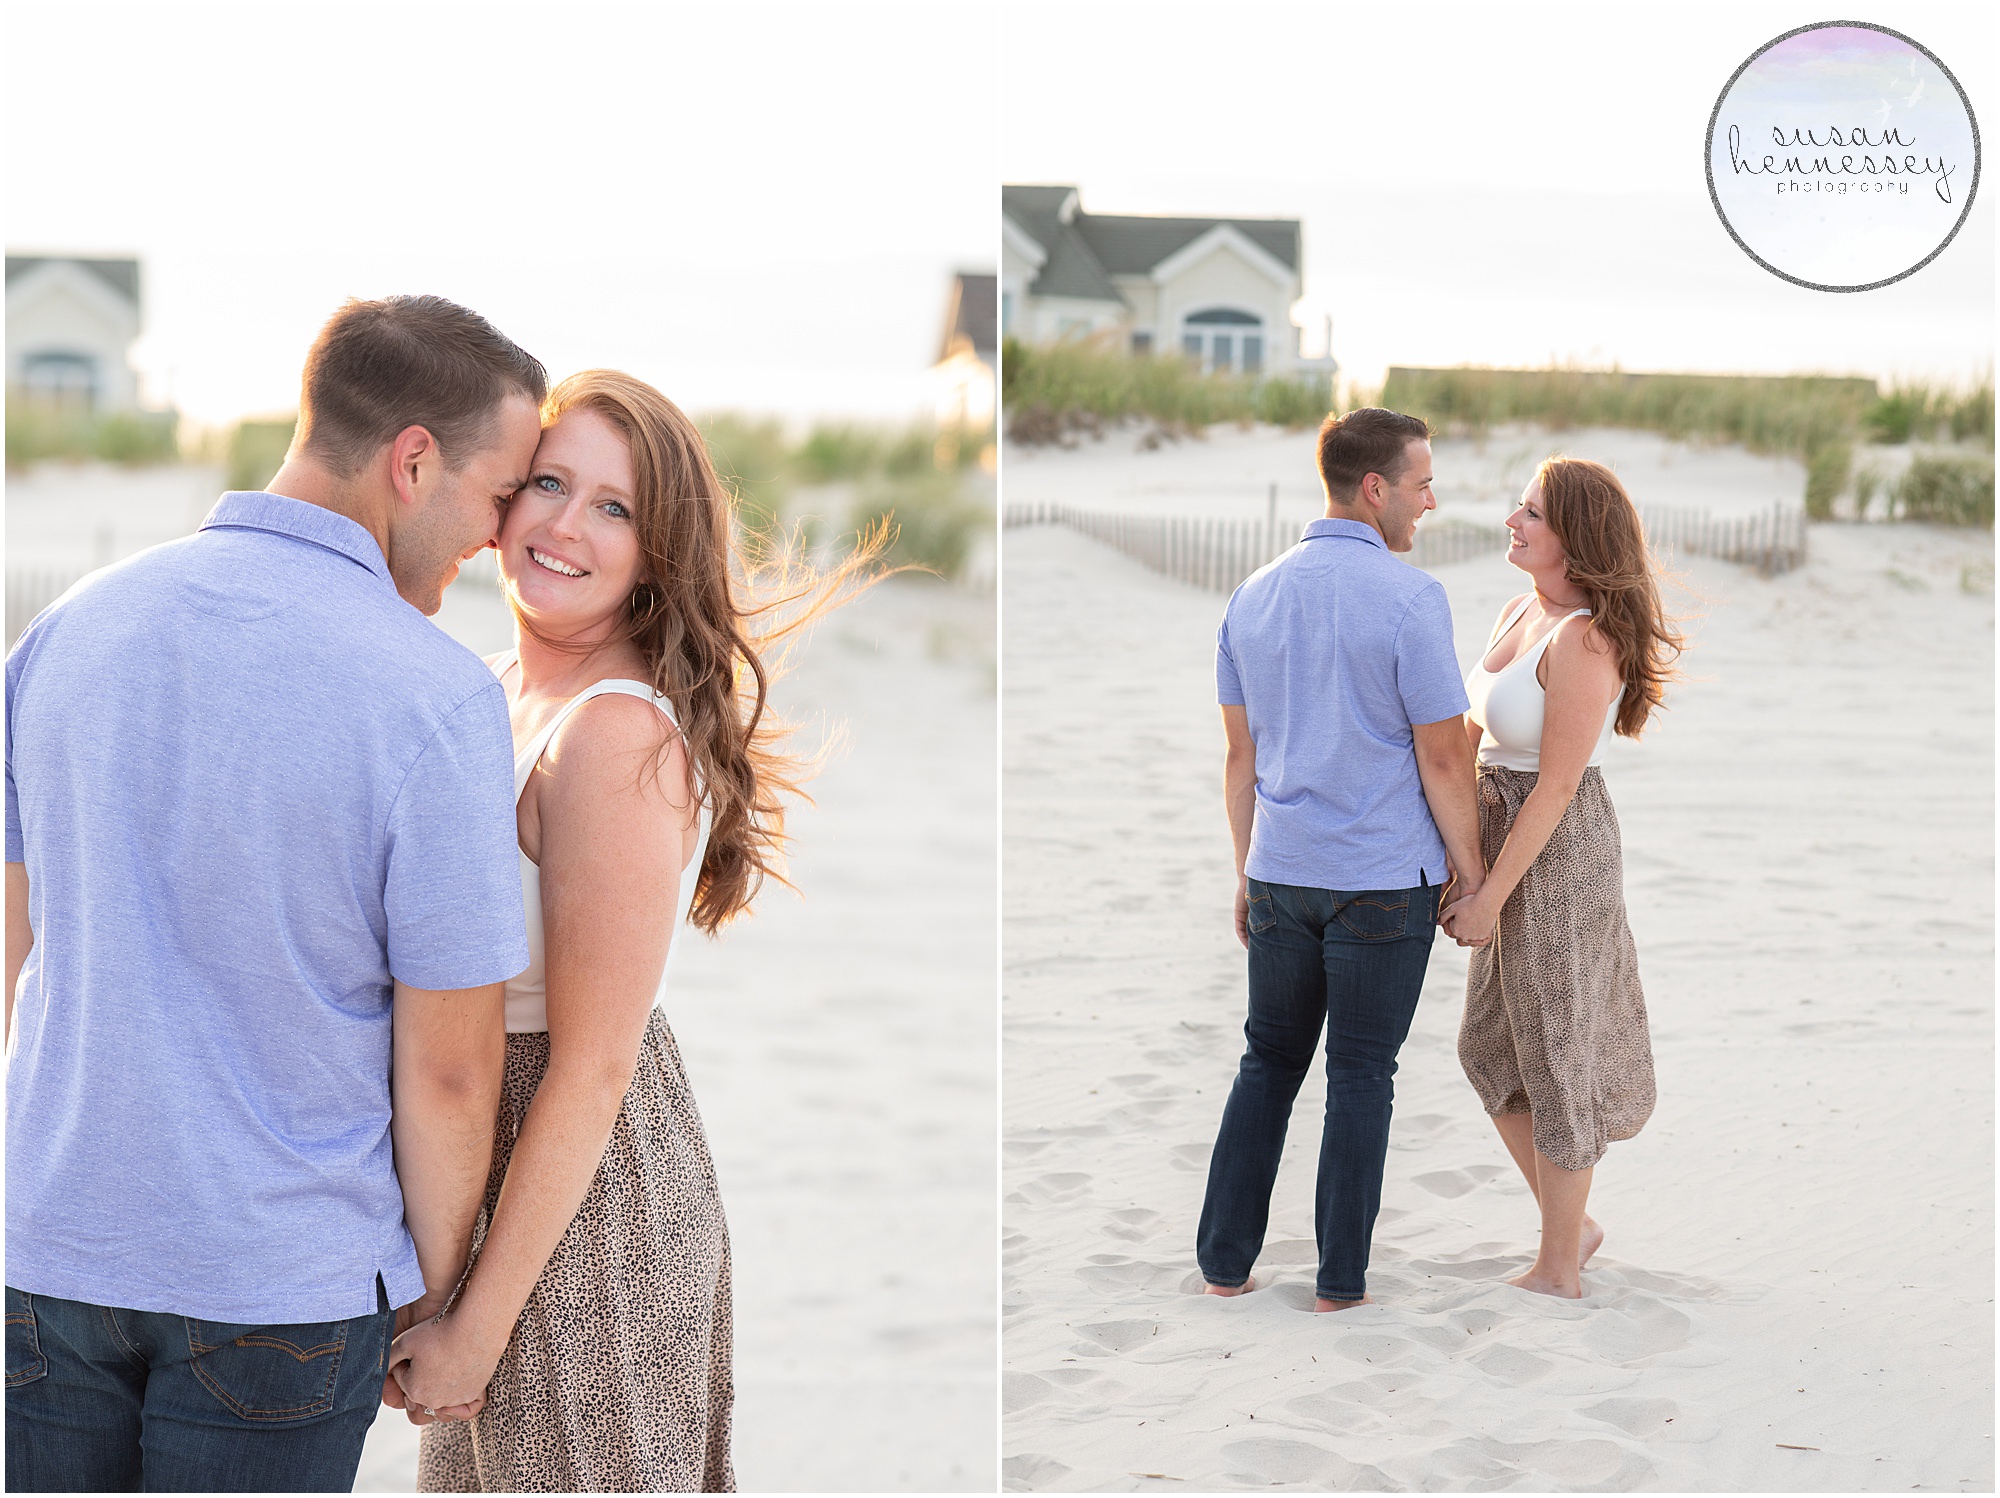 Jonathan and Erica's Surprise Proposal in Stone Harbor, NJ